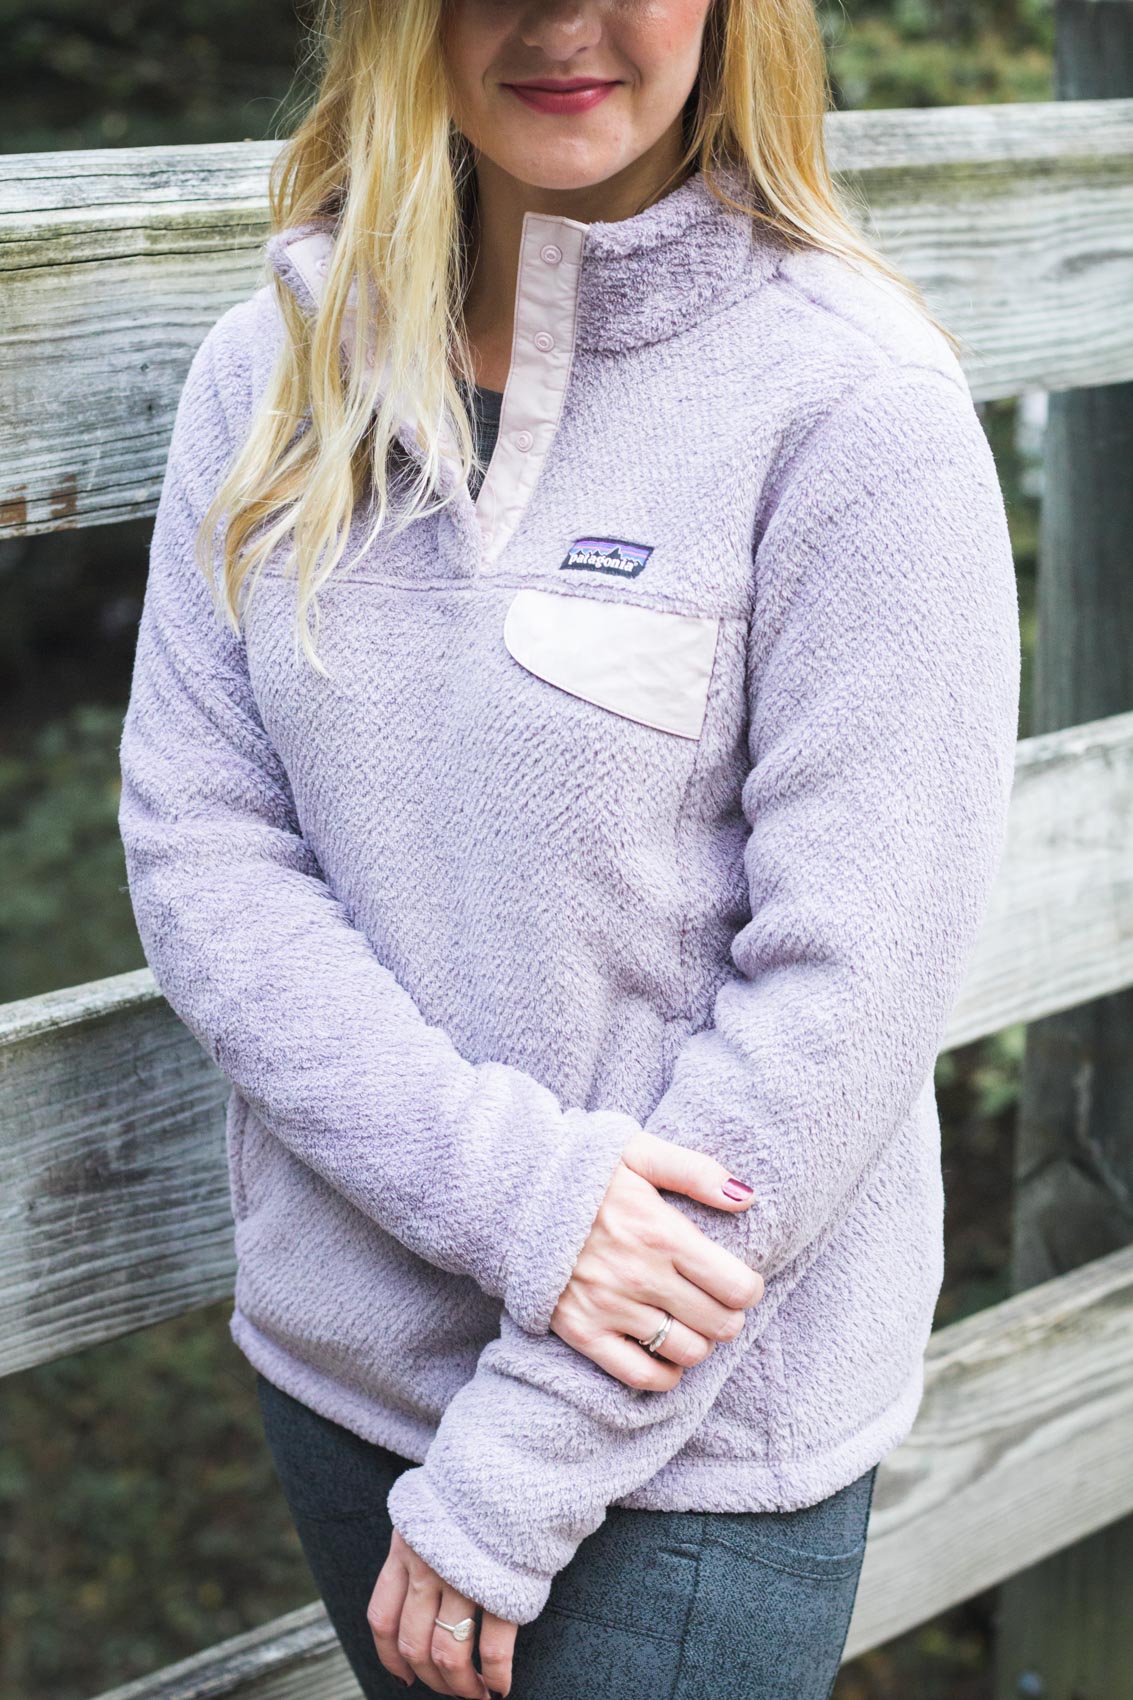 It's rare to find a Patagonia pullover sale going on, but it's your lucky day! I add this fuzzy purple Patagonia snap t pullover to my winter outfits all the time! 